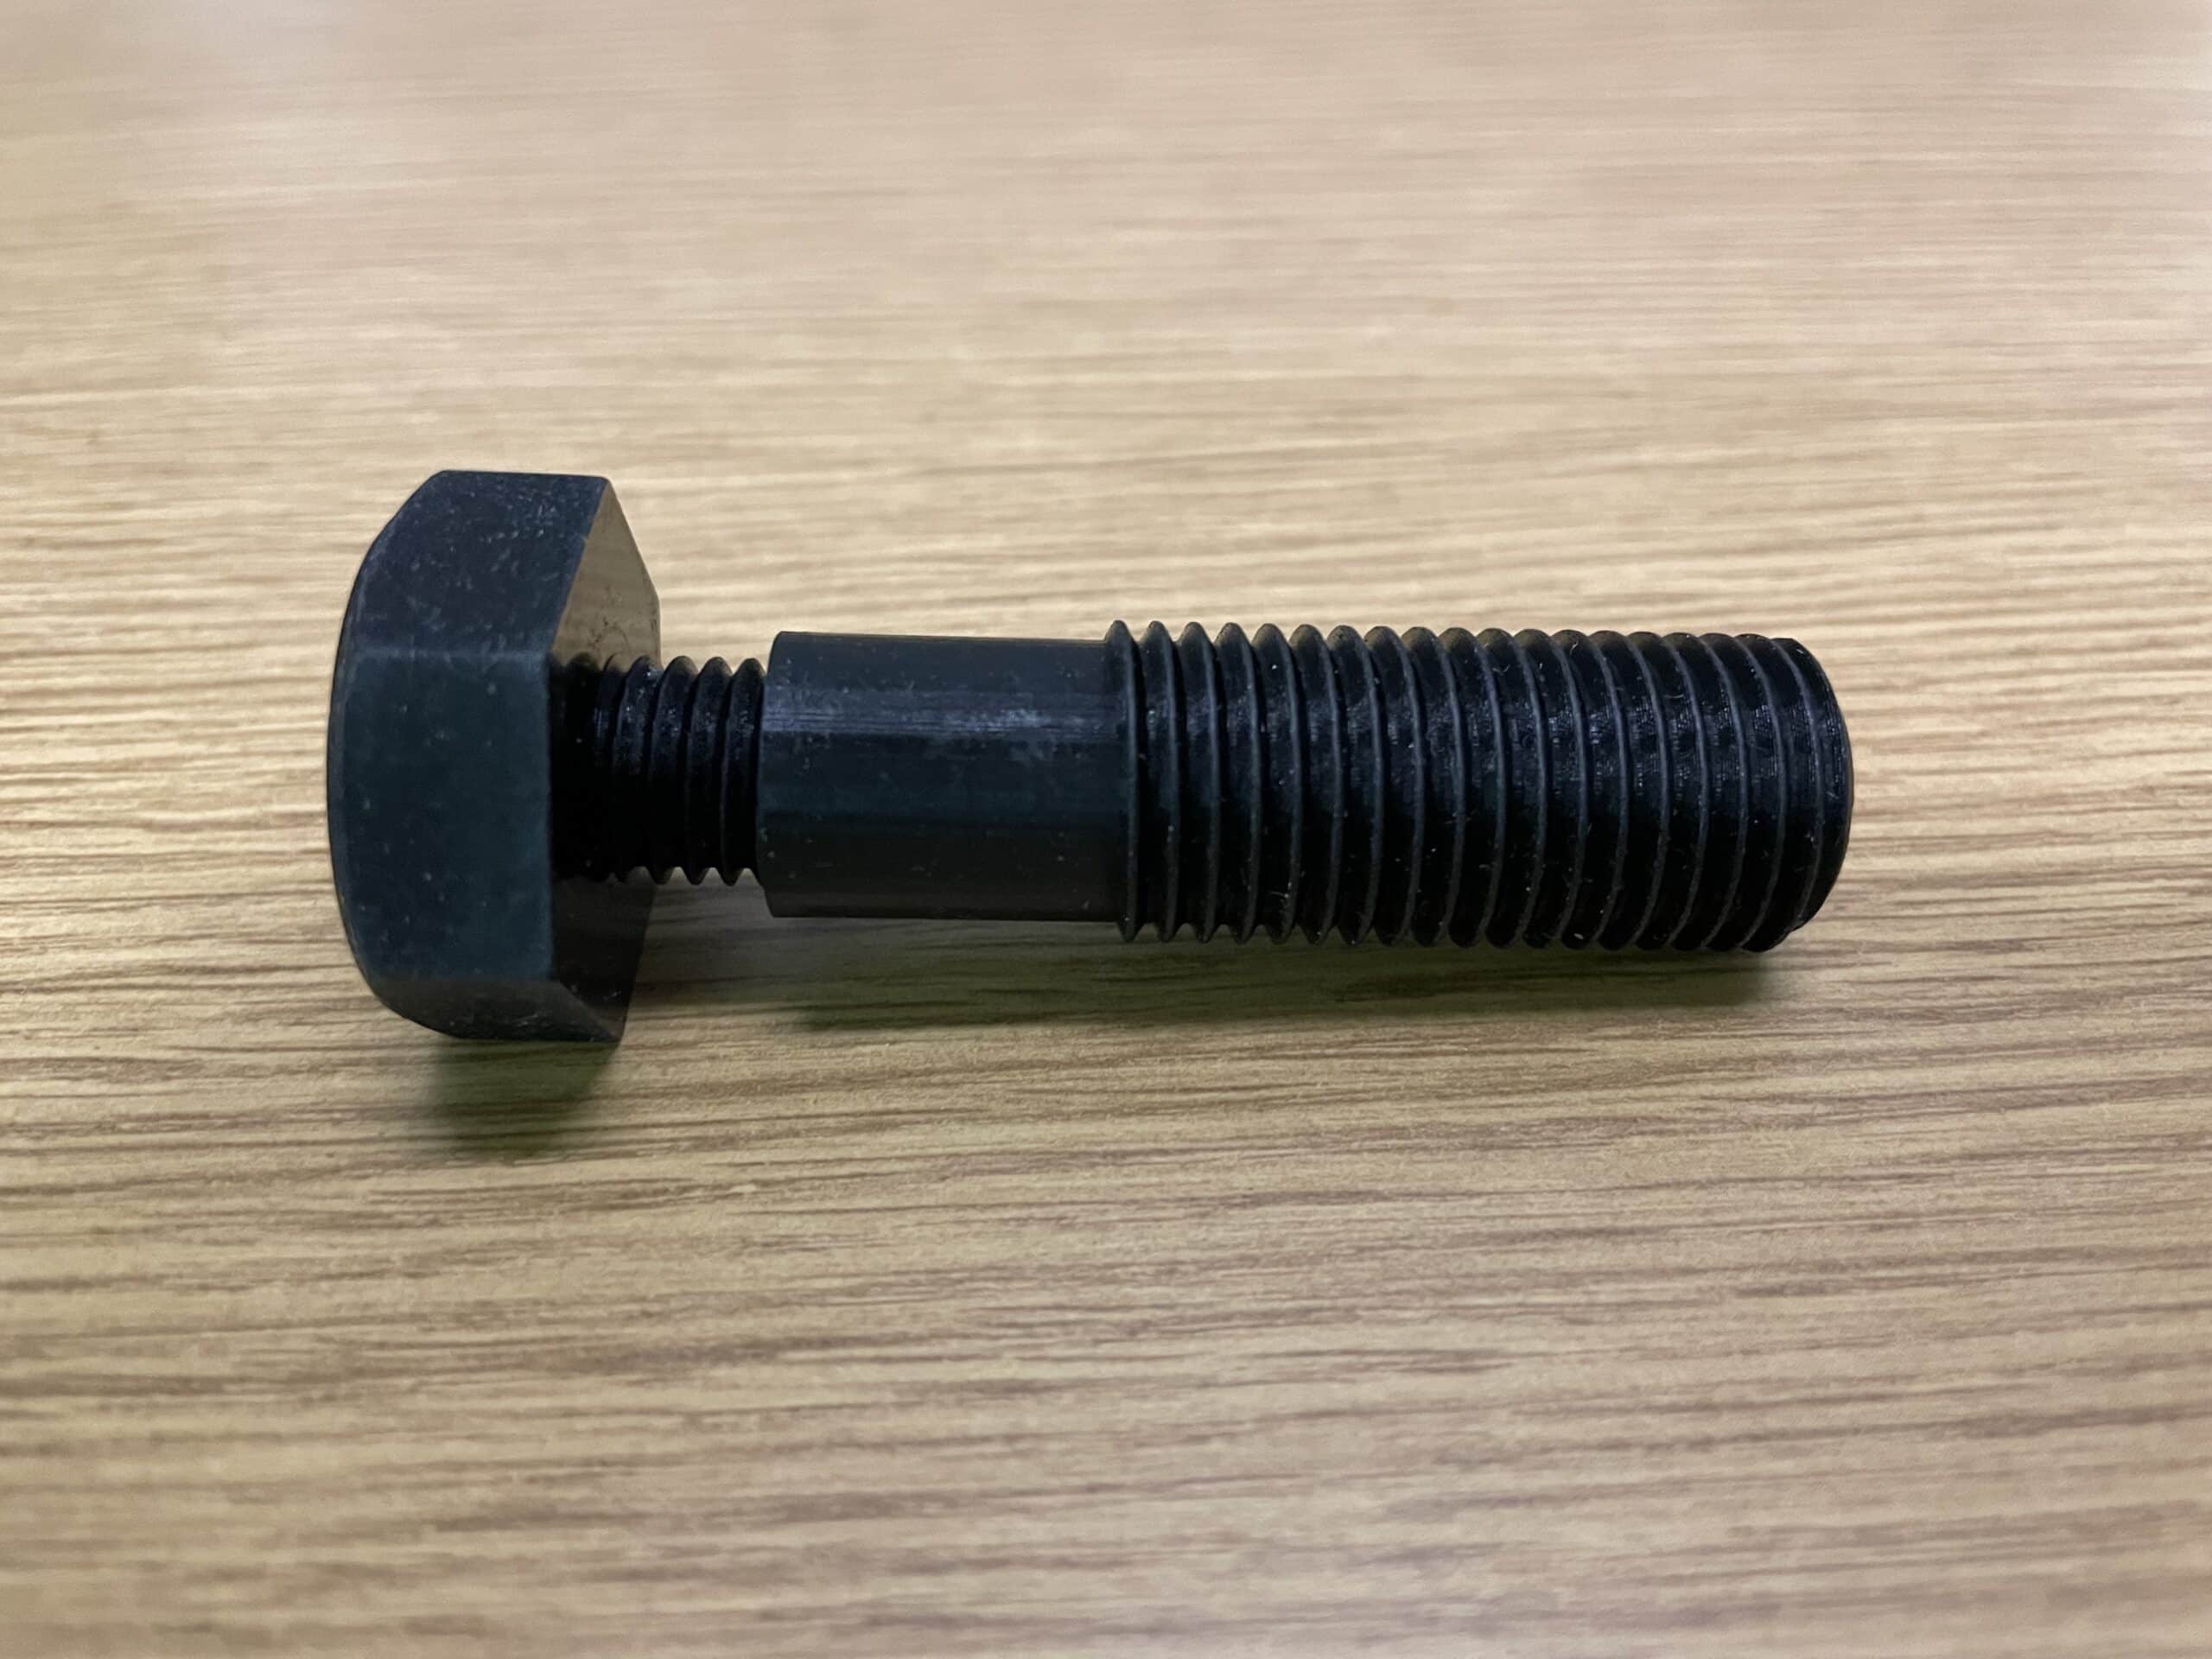 The bolt is actually a two-piece assembly: there is a reverse-threaded sleeve. (Image courtesy PADT Inc.)